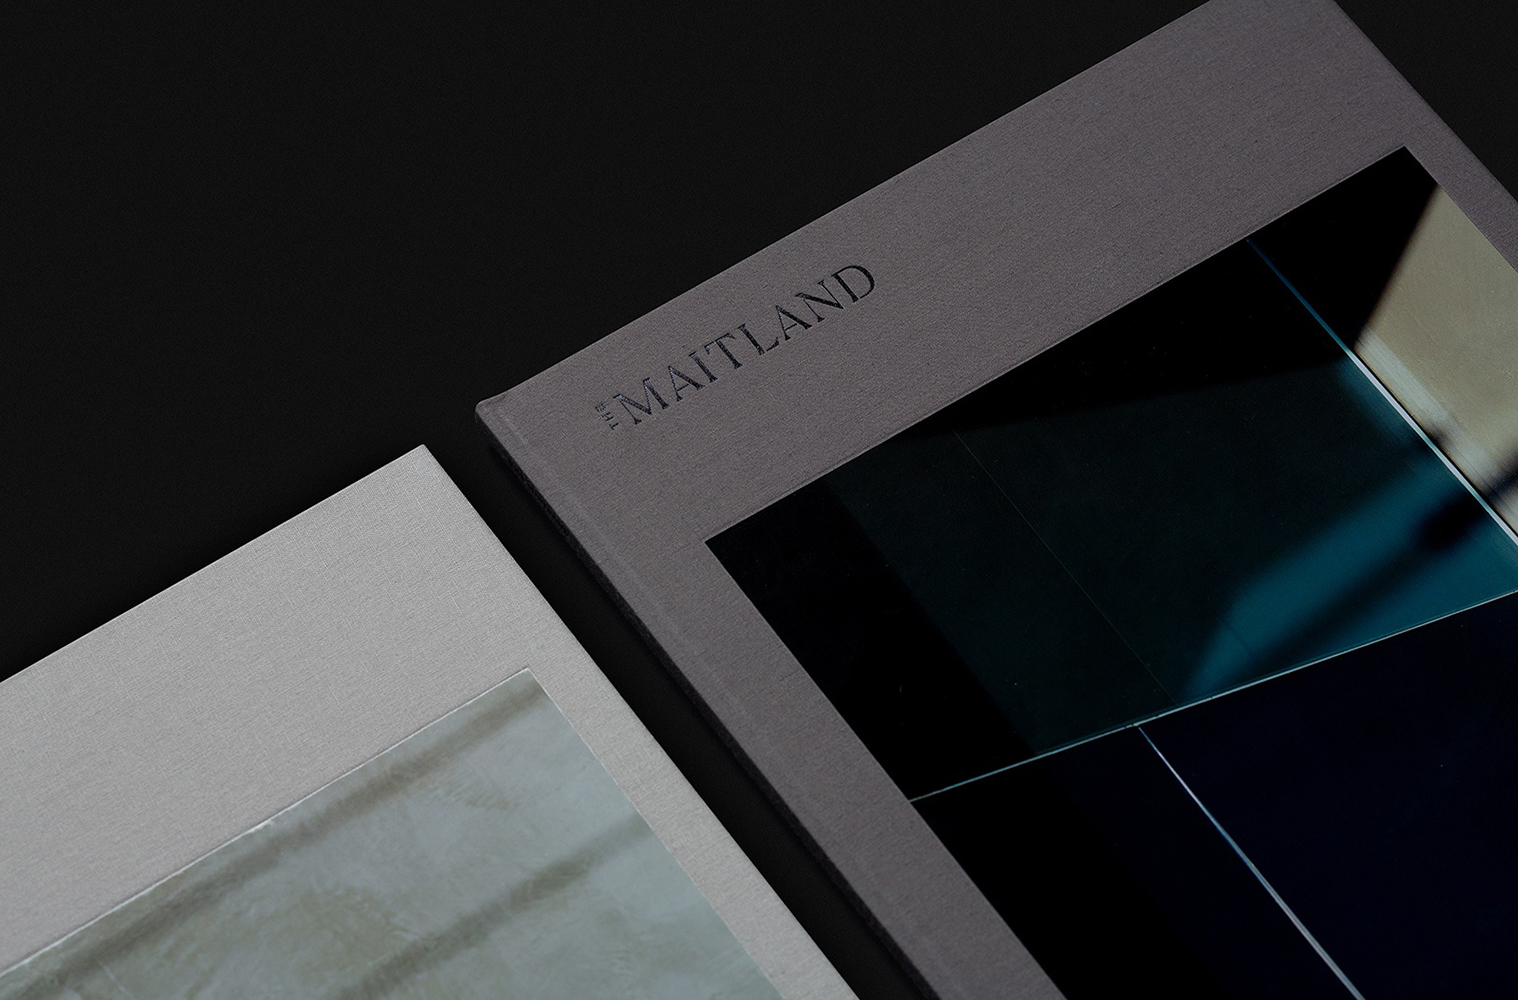 Branding, art direction, brochure and website by Studio Brave featuring photography by Traianos Pakioufakis for property development The Maitland